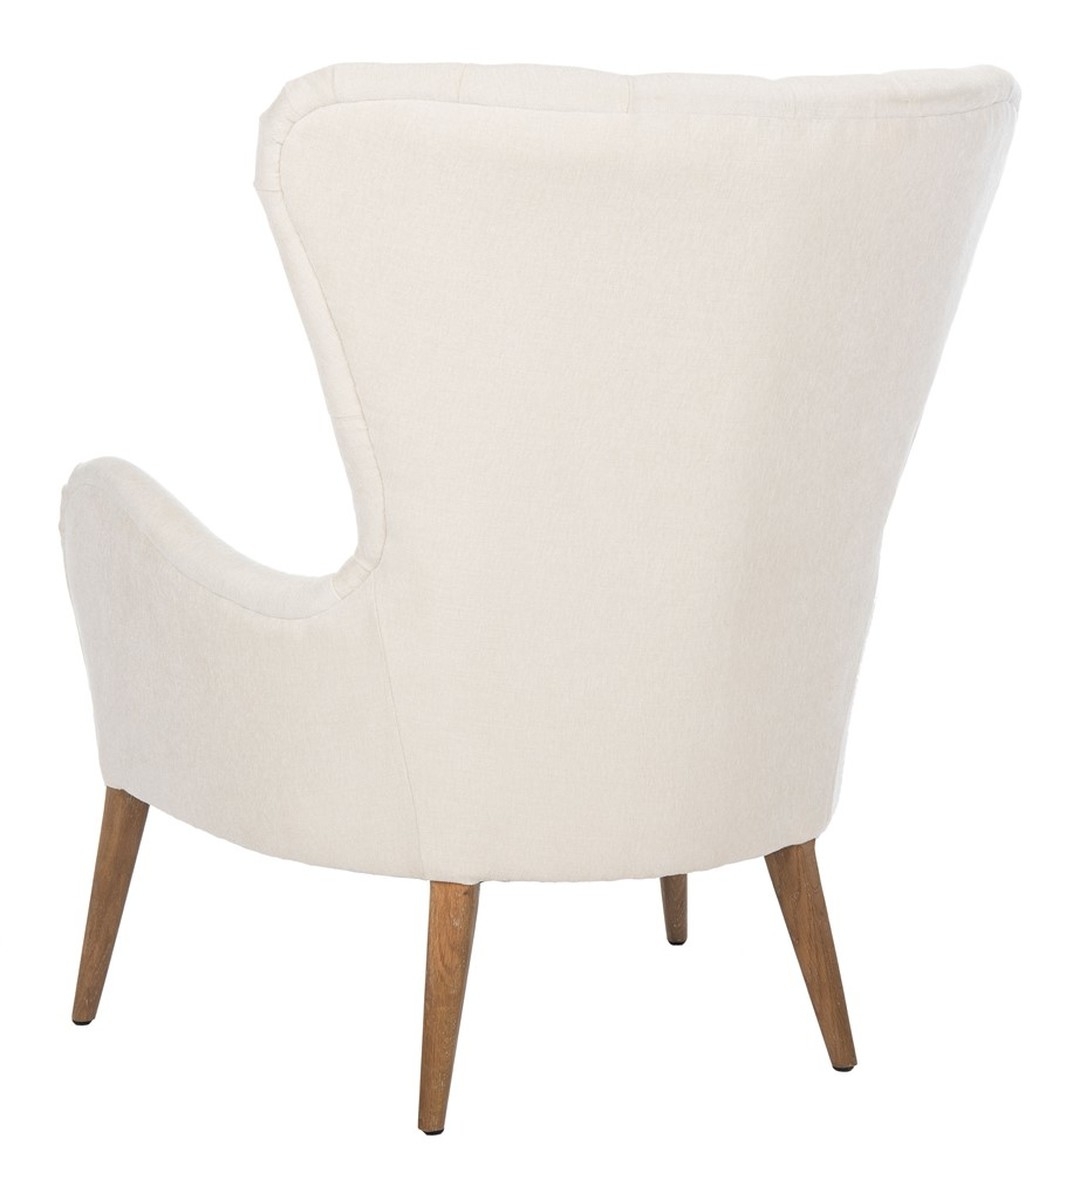 Brayden Contemporary Wingback Chair - Off White - Arlo Home - Image 9